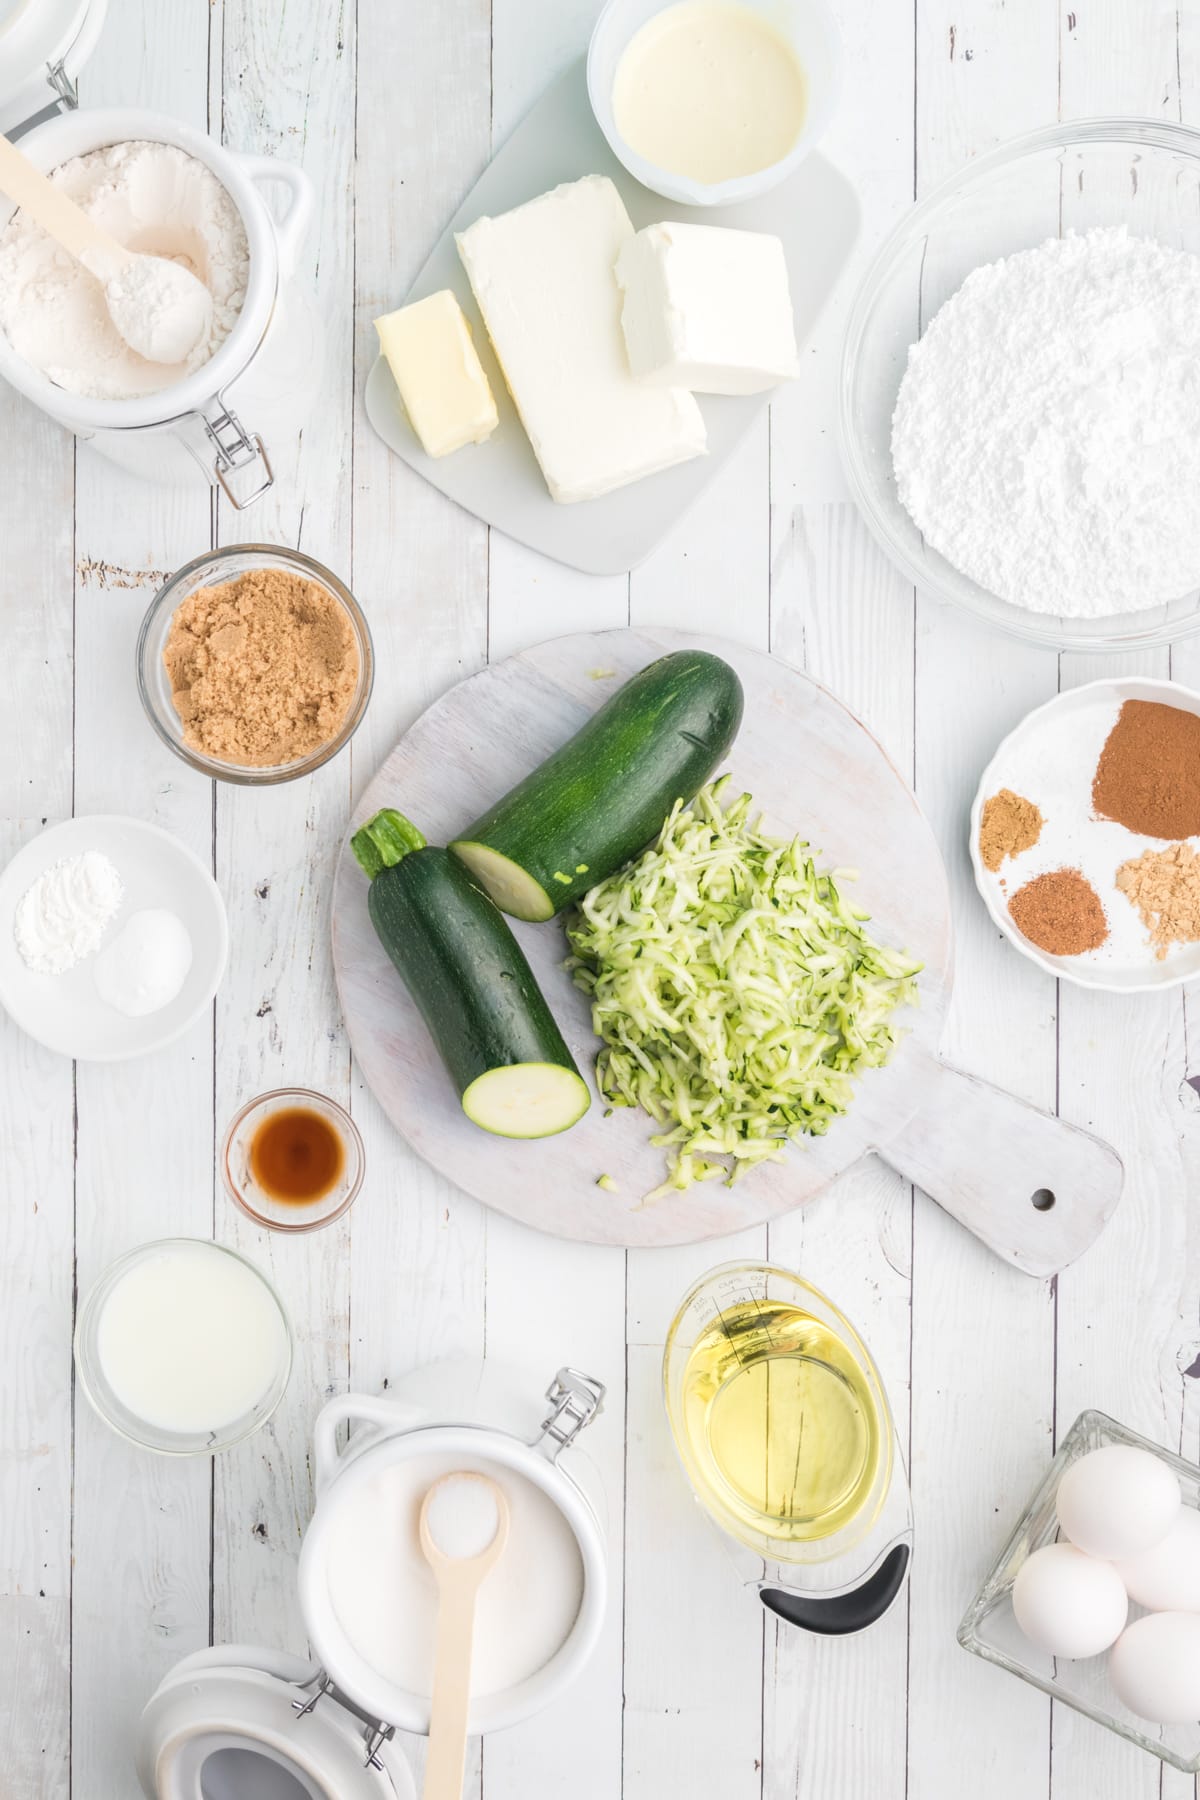 The ingredients for zucchini cake are spread out across a white surface.